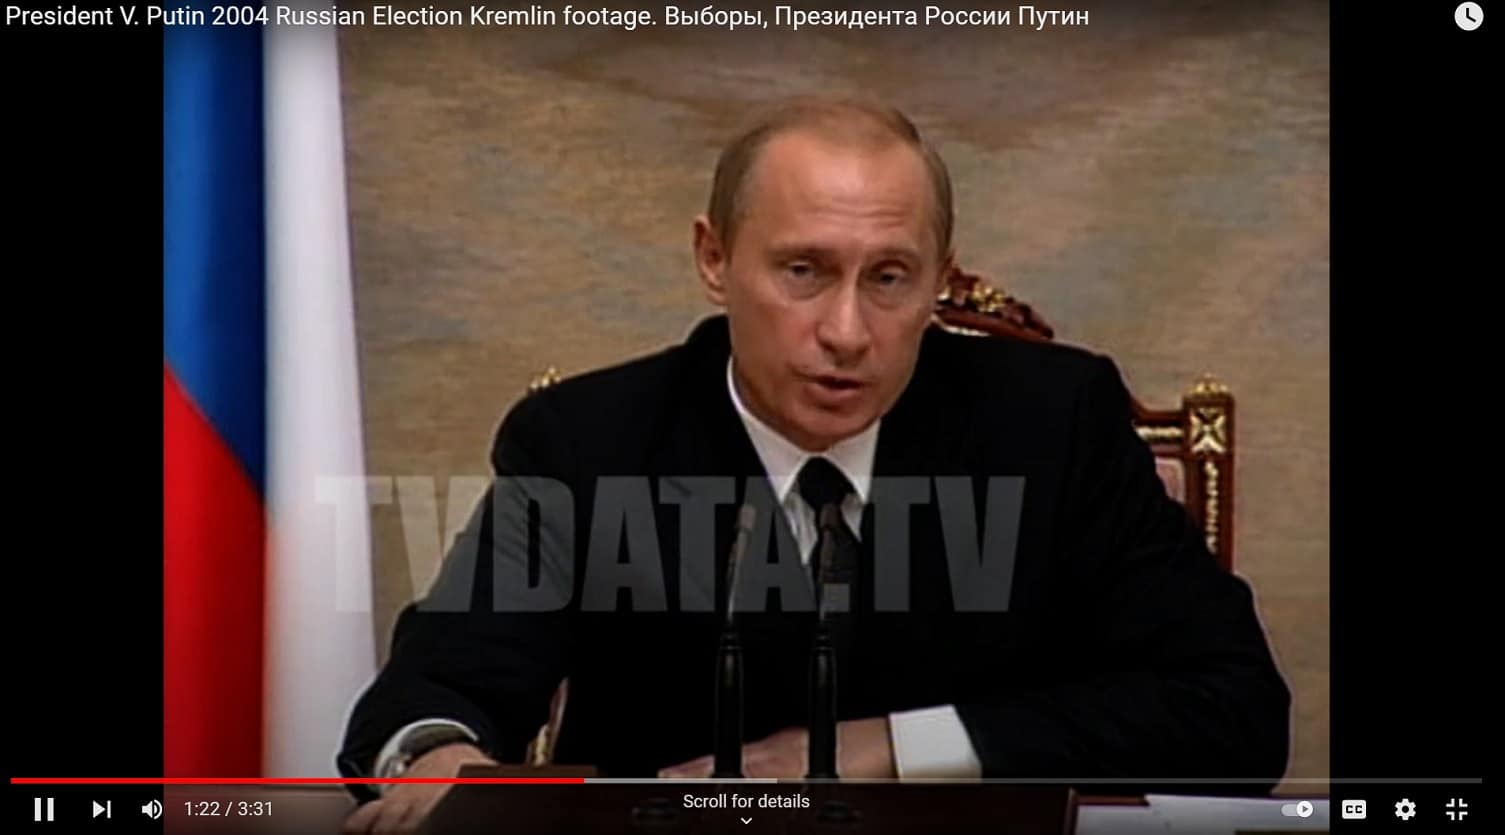 2004 Russian presidential election was held on 14 March 2004. Incumbent President Vladimir Putin